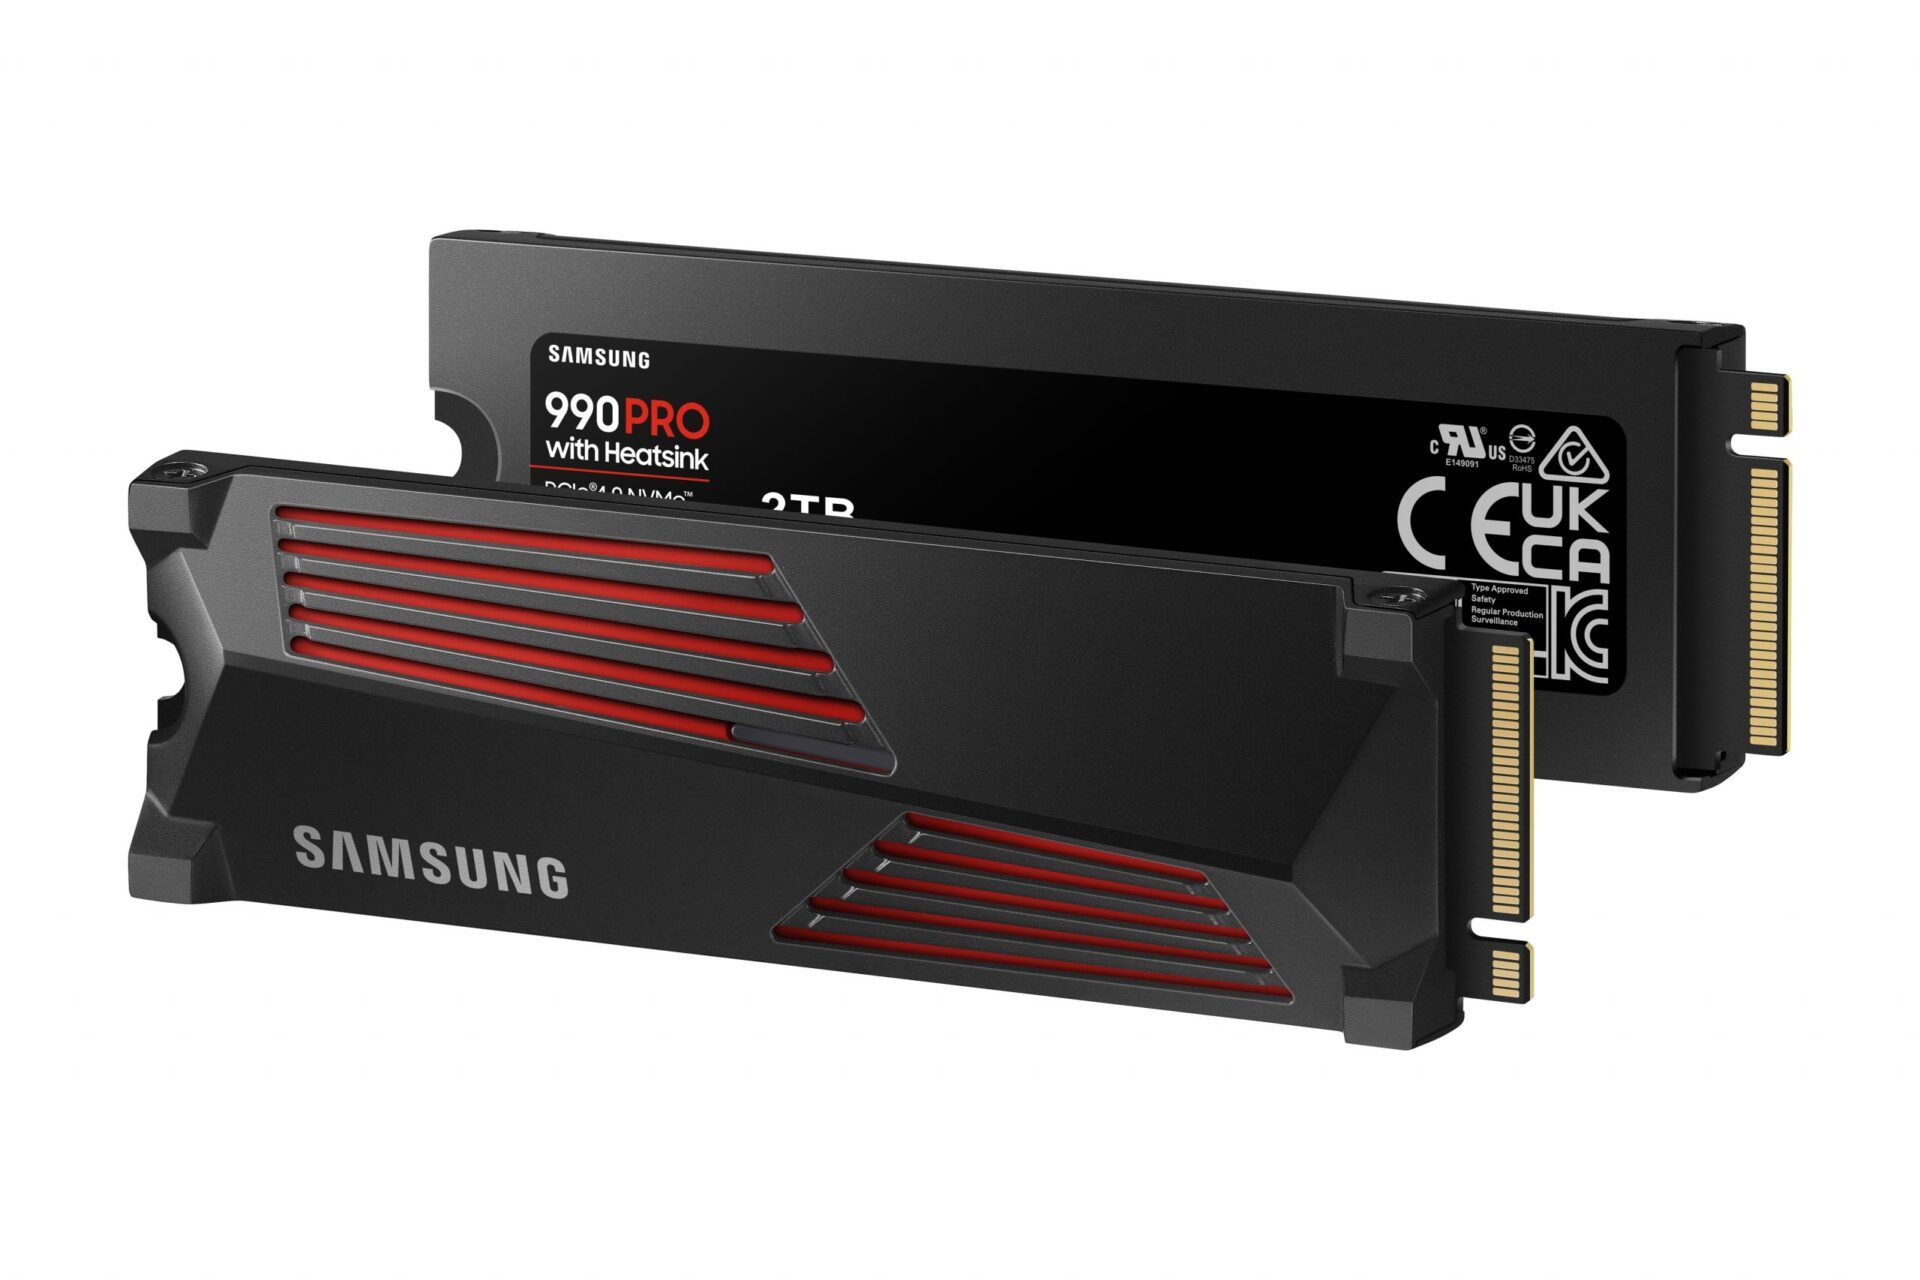 Samsung 990 PRO HS-front-and-back-1-scaled